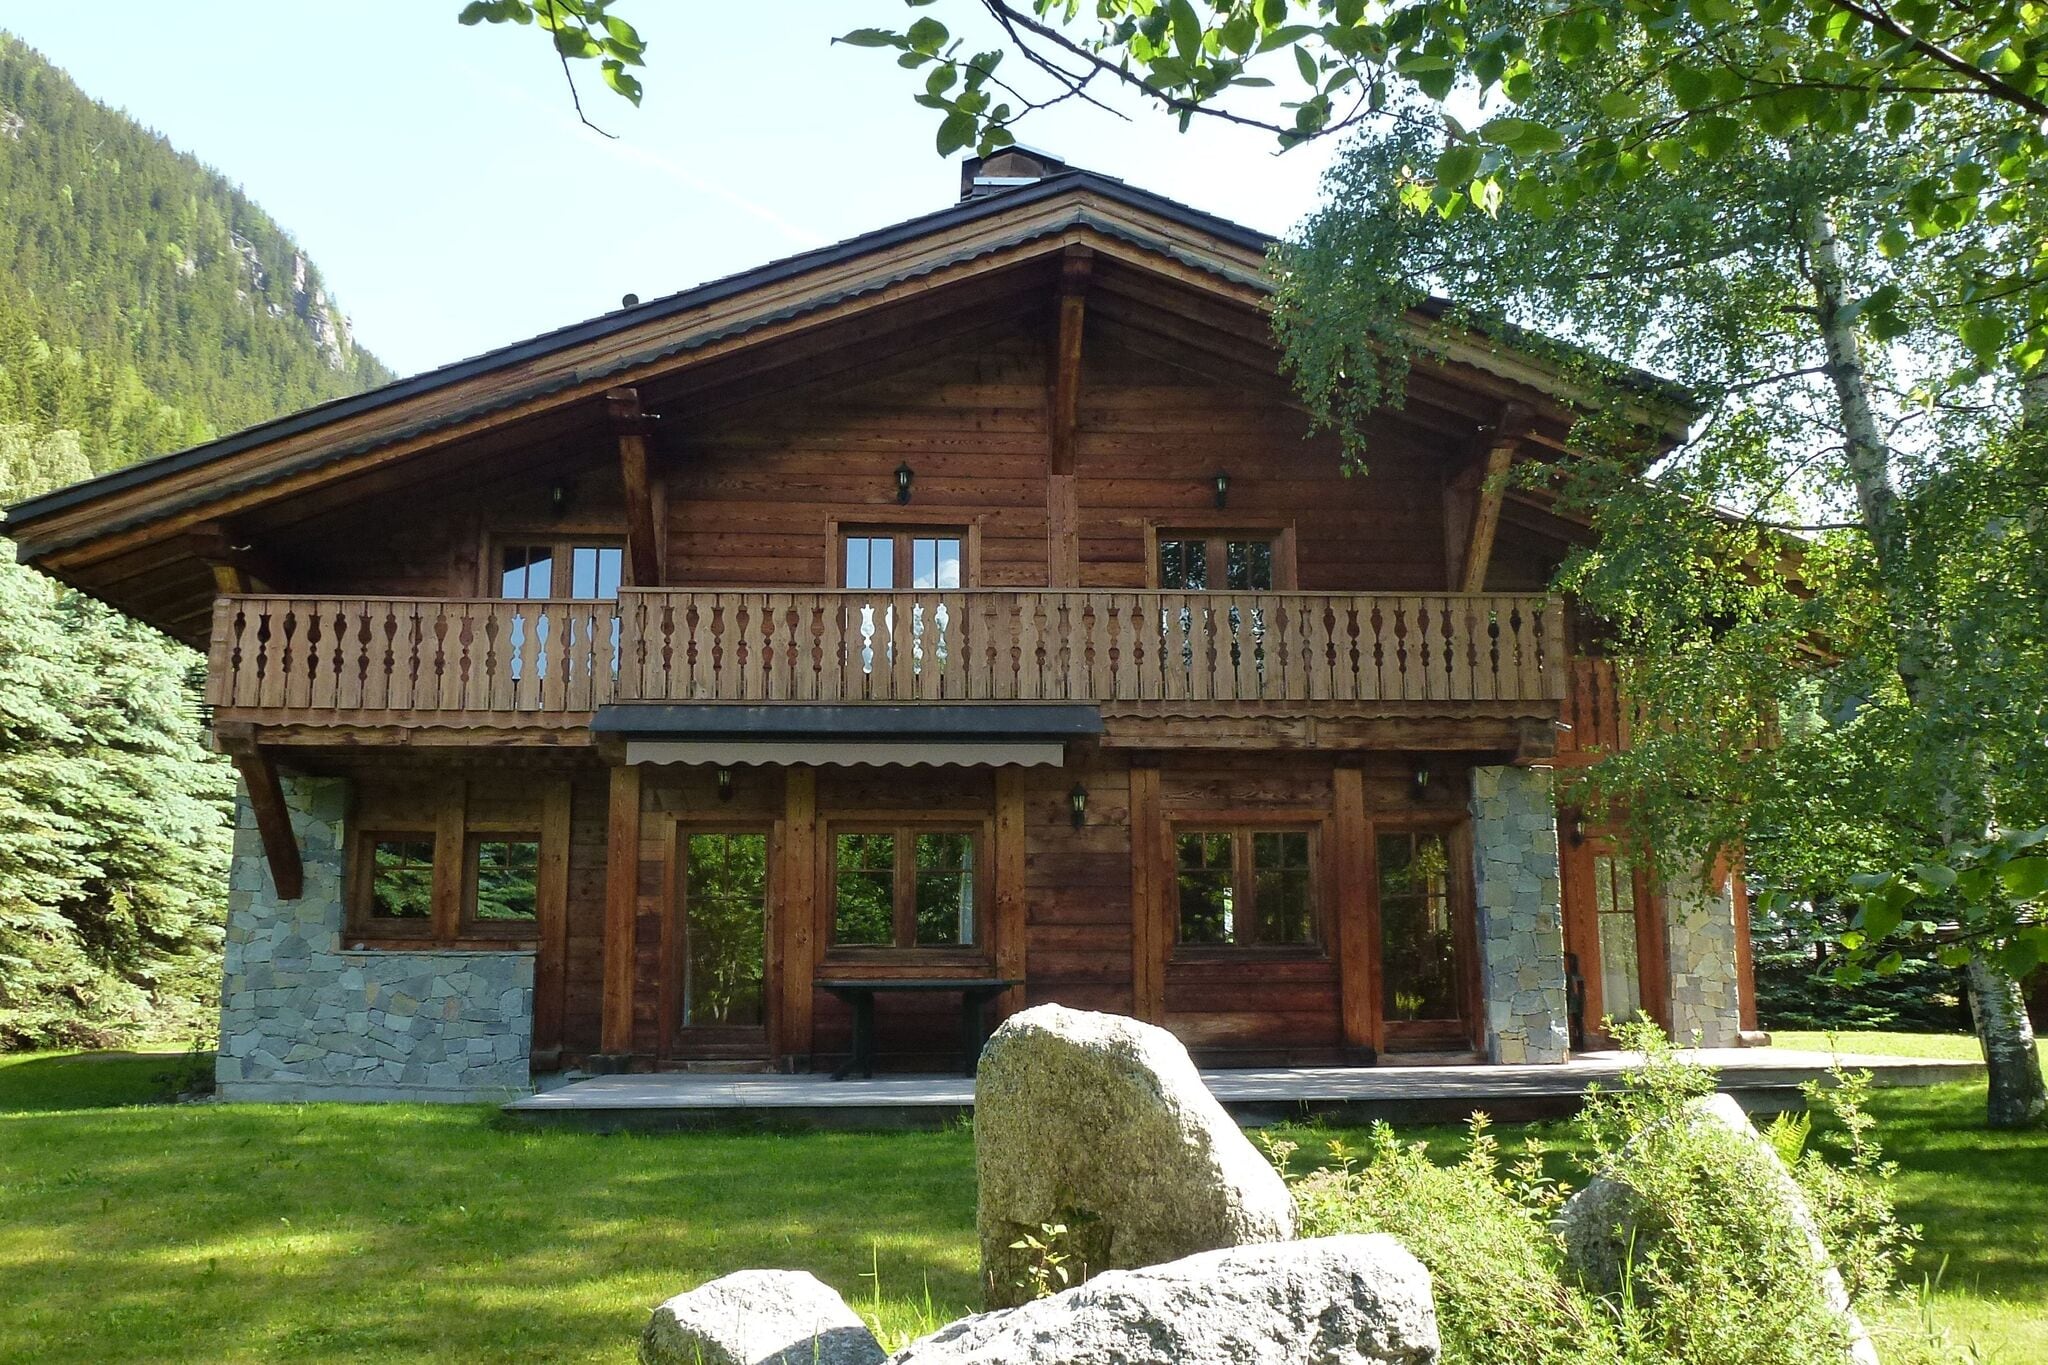 Spacious chalet that will delight large families